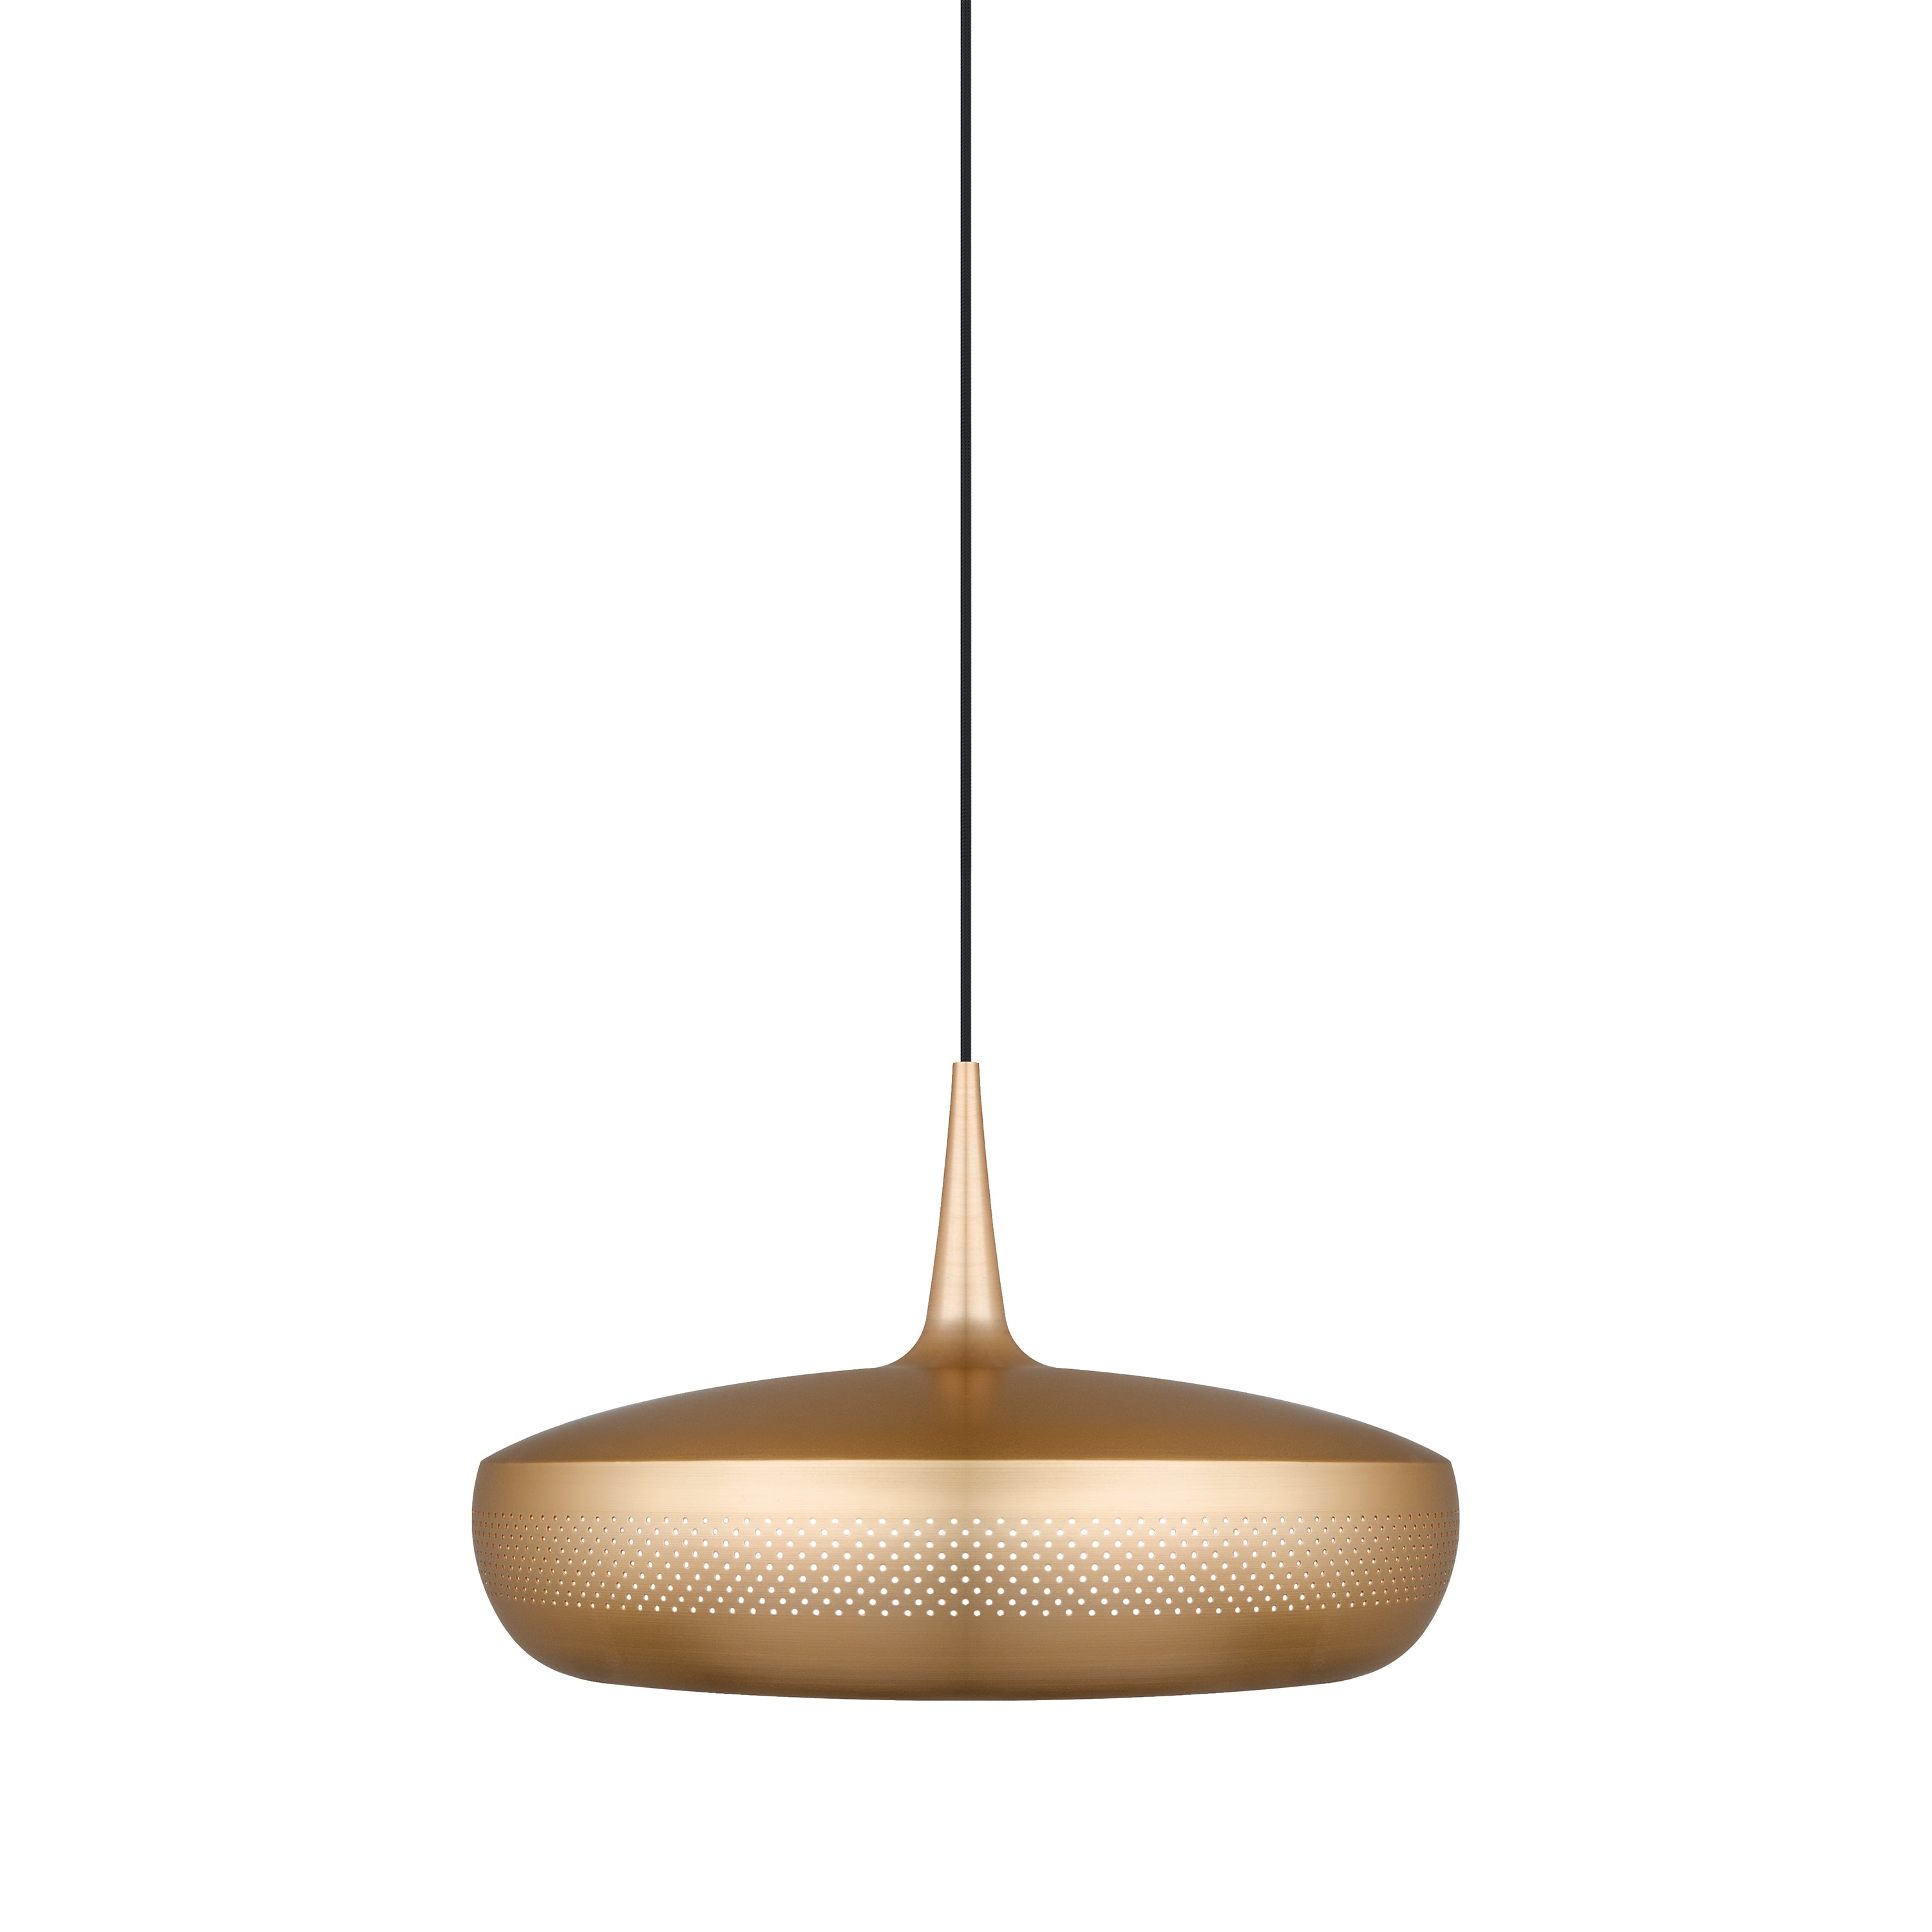 Clava Pendant | Buy Umage online at A+R